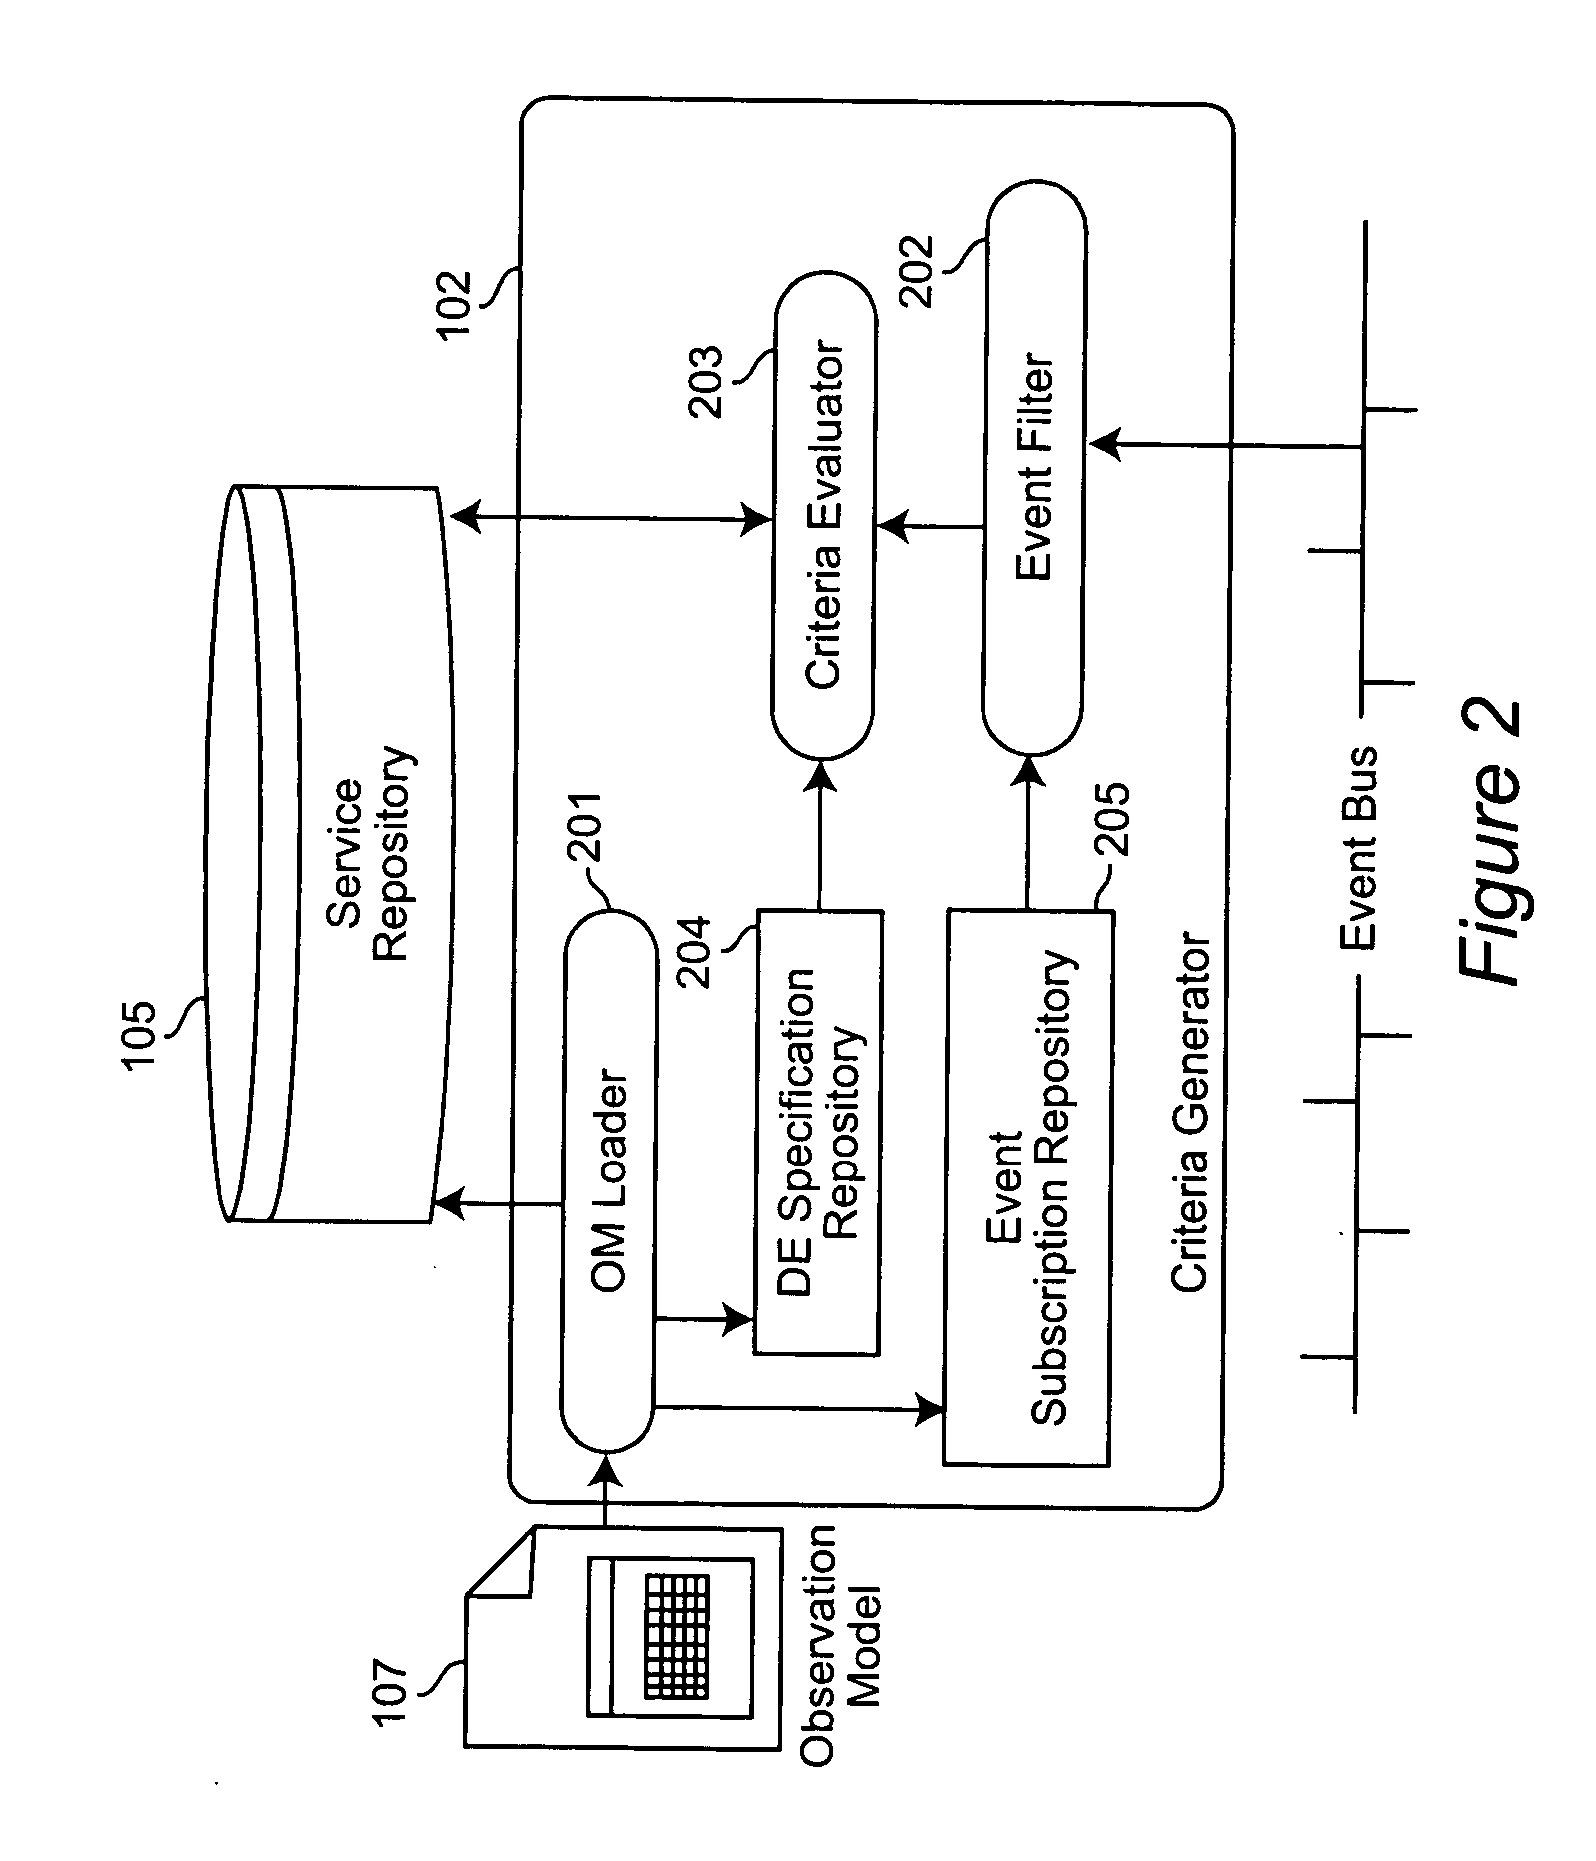 System and method for web service QoS observation and dynamic selection